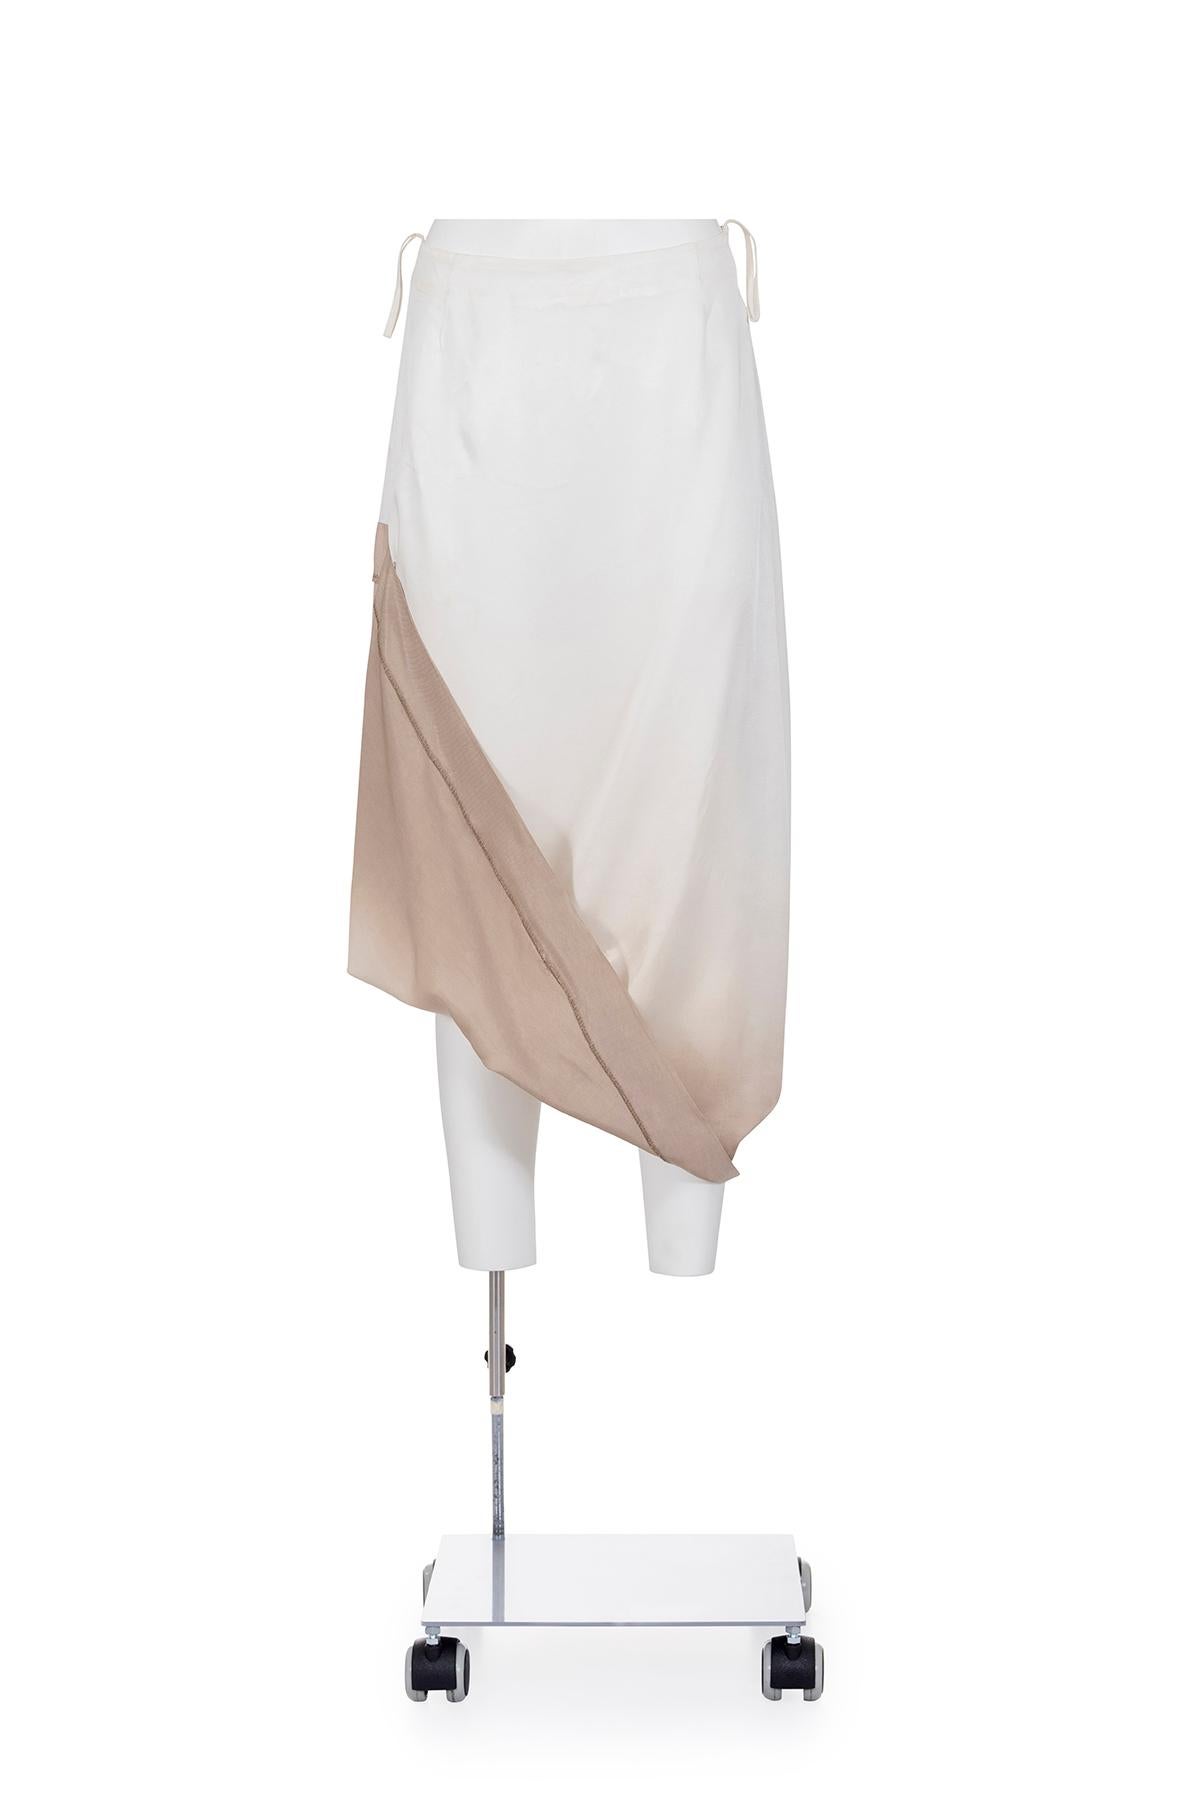 Spring Summer 2003 iconic shaded hitched up skirt by Maison Martin Margiela.
The composition is 100% rayon.